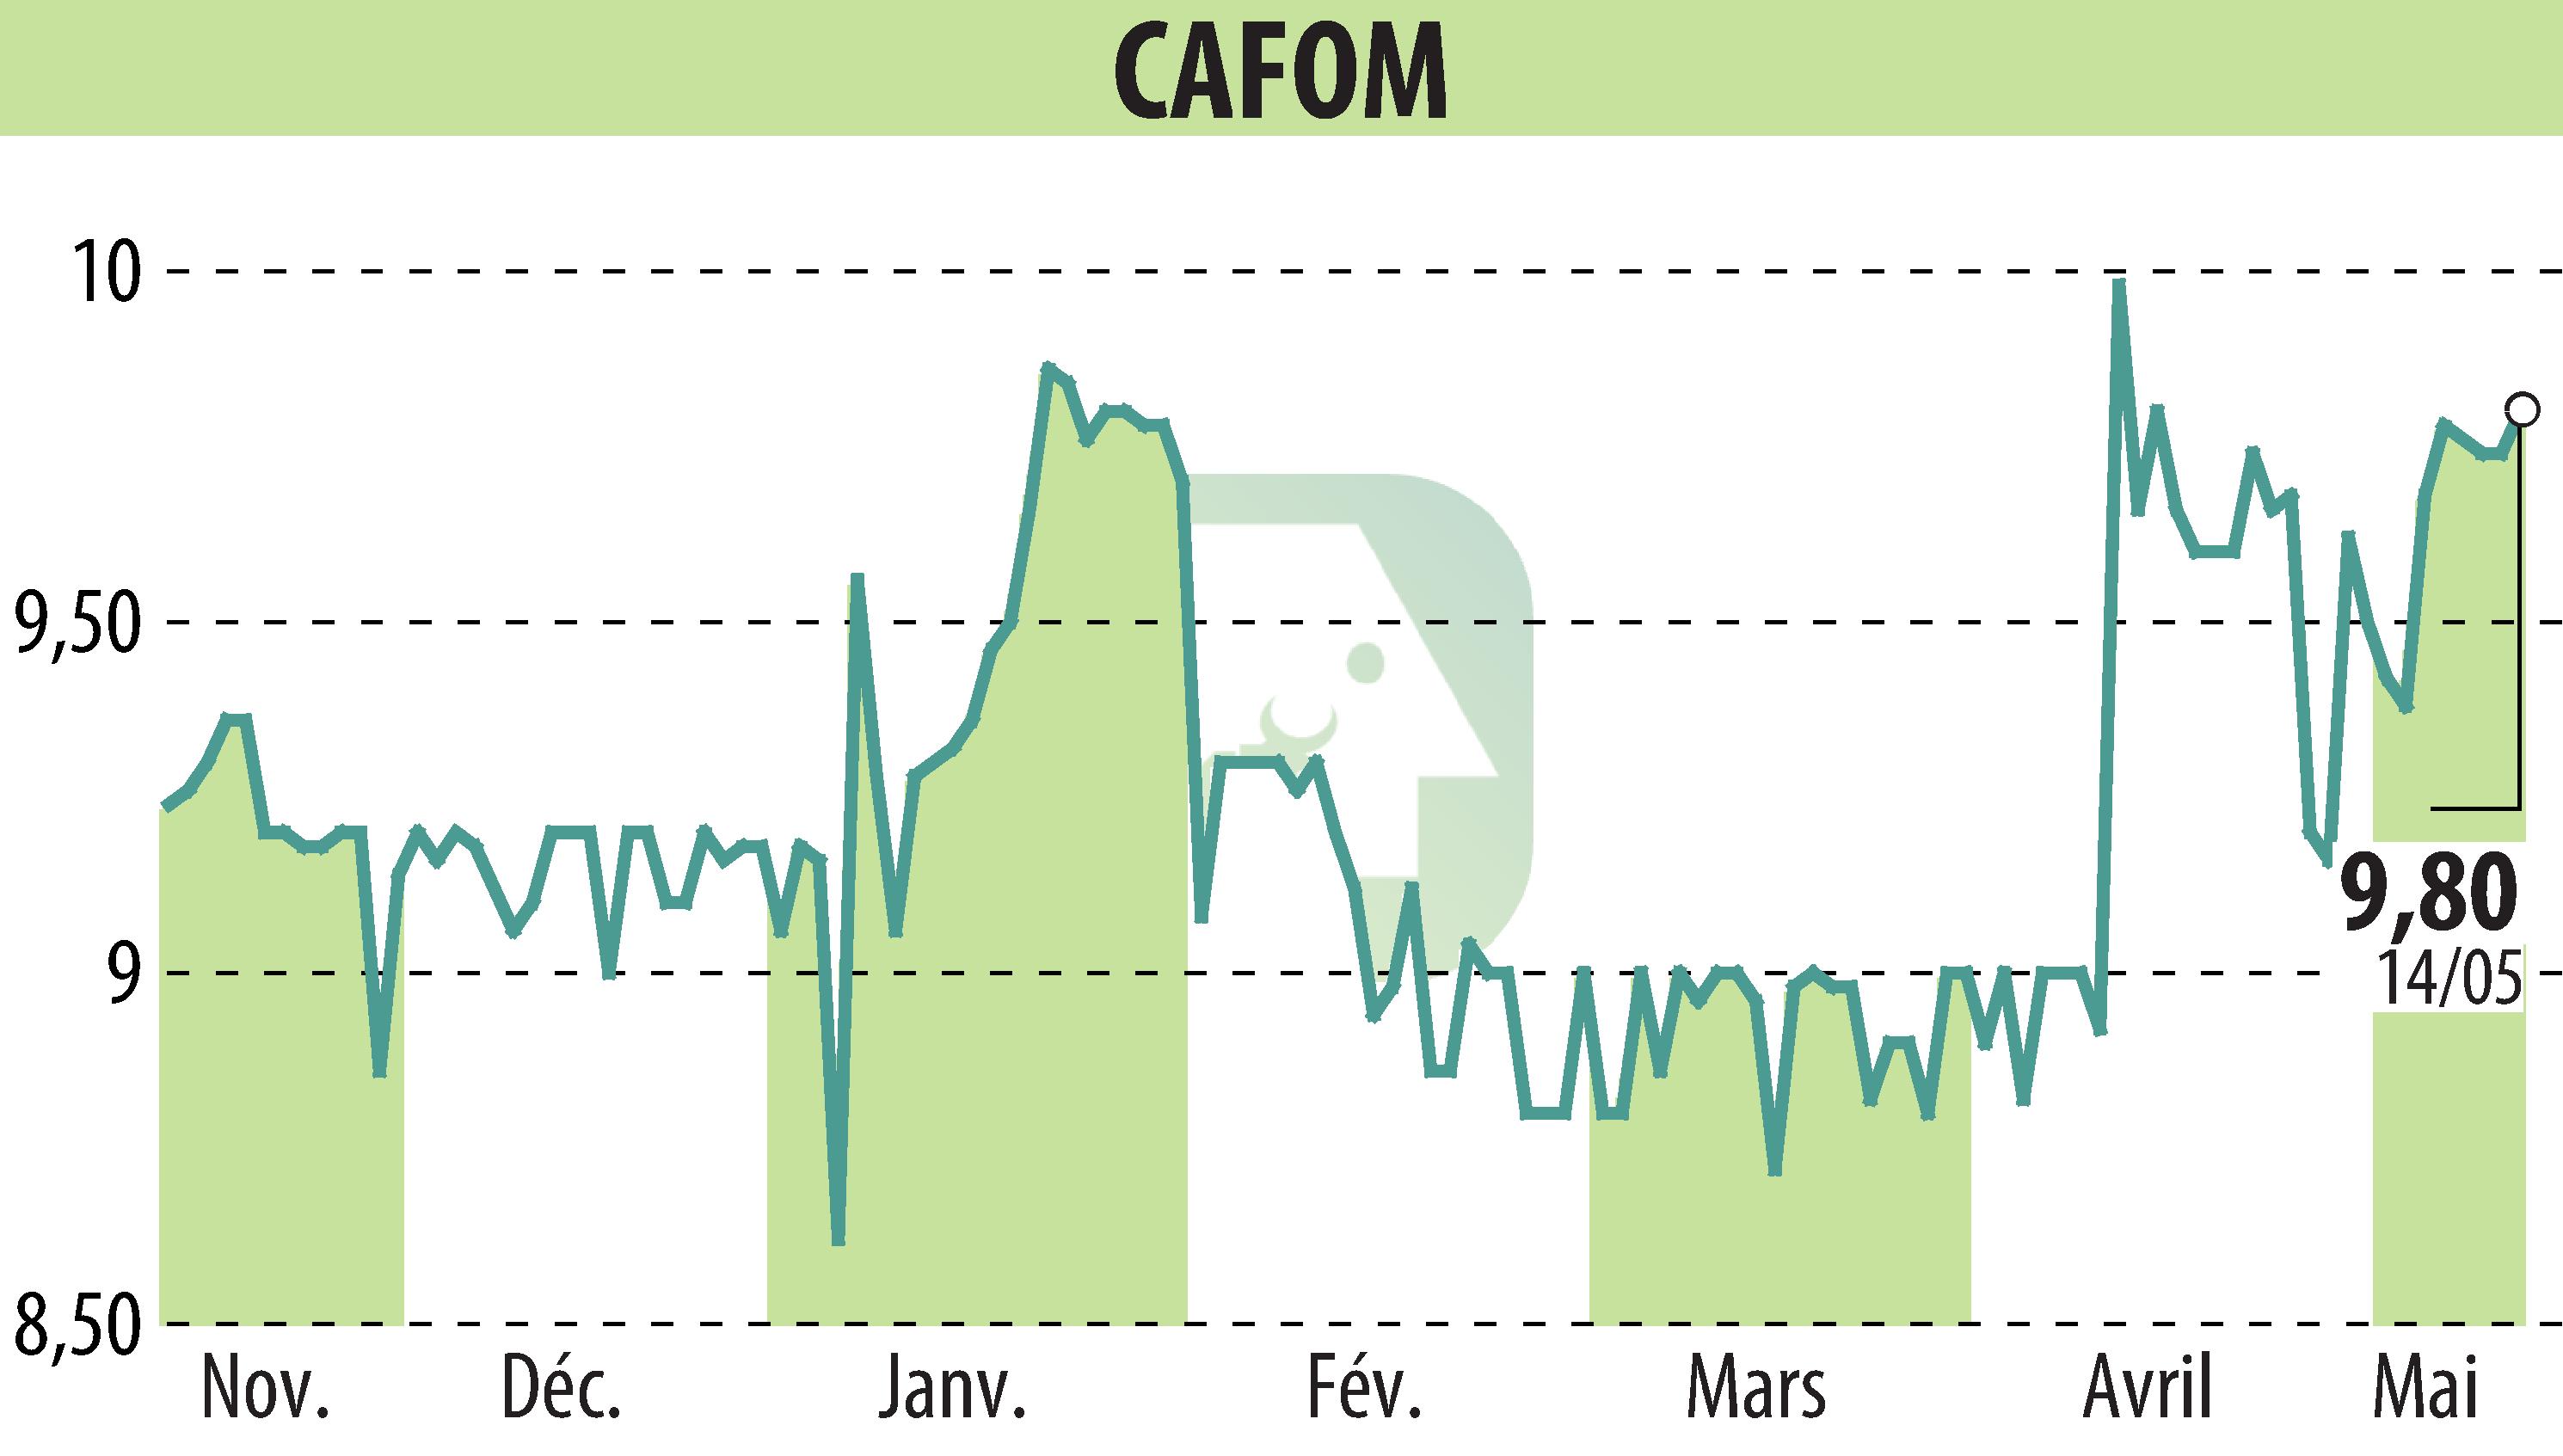 Stock price chart of CAFOM (EPA:CAFO) showing fluctuations.